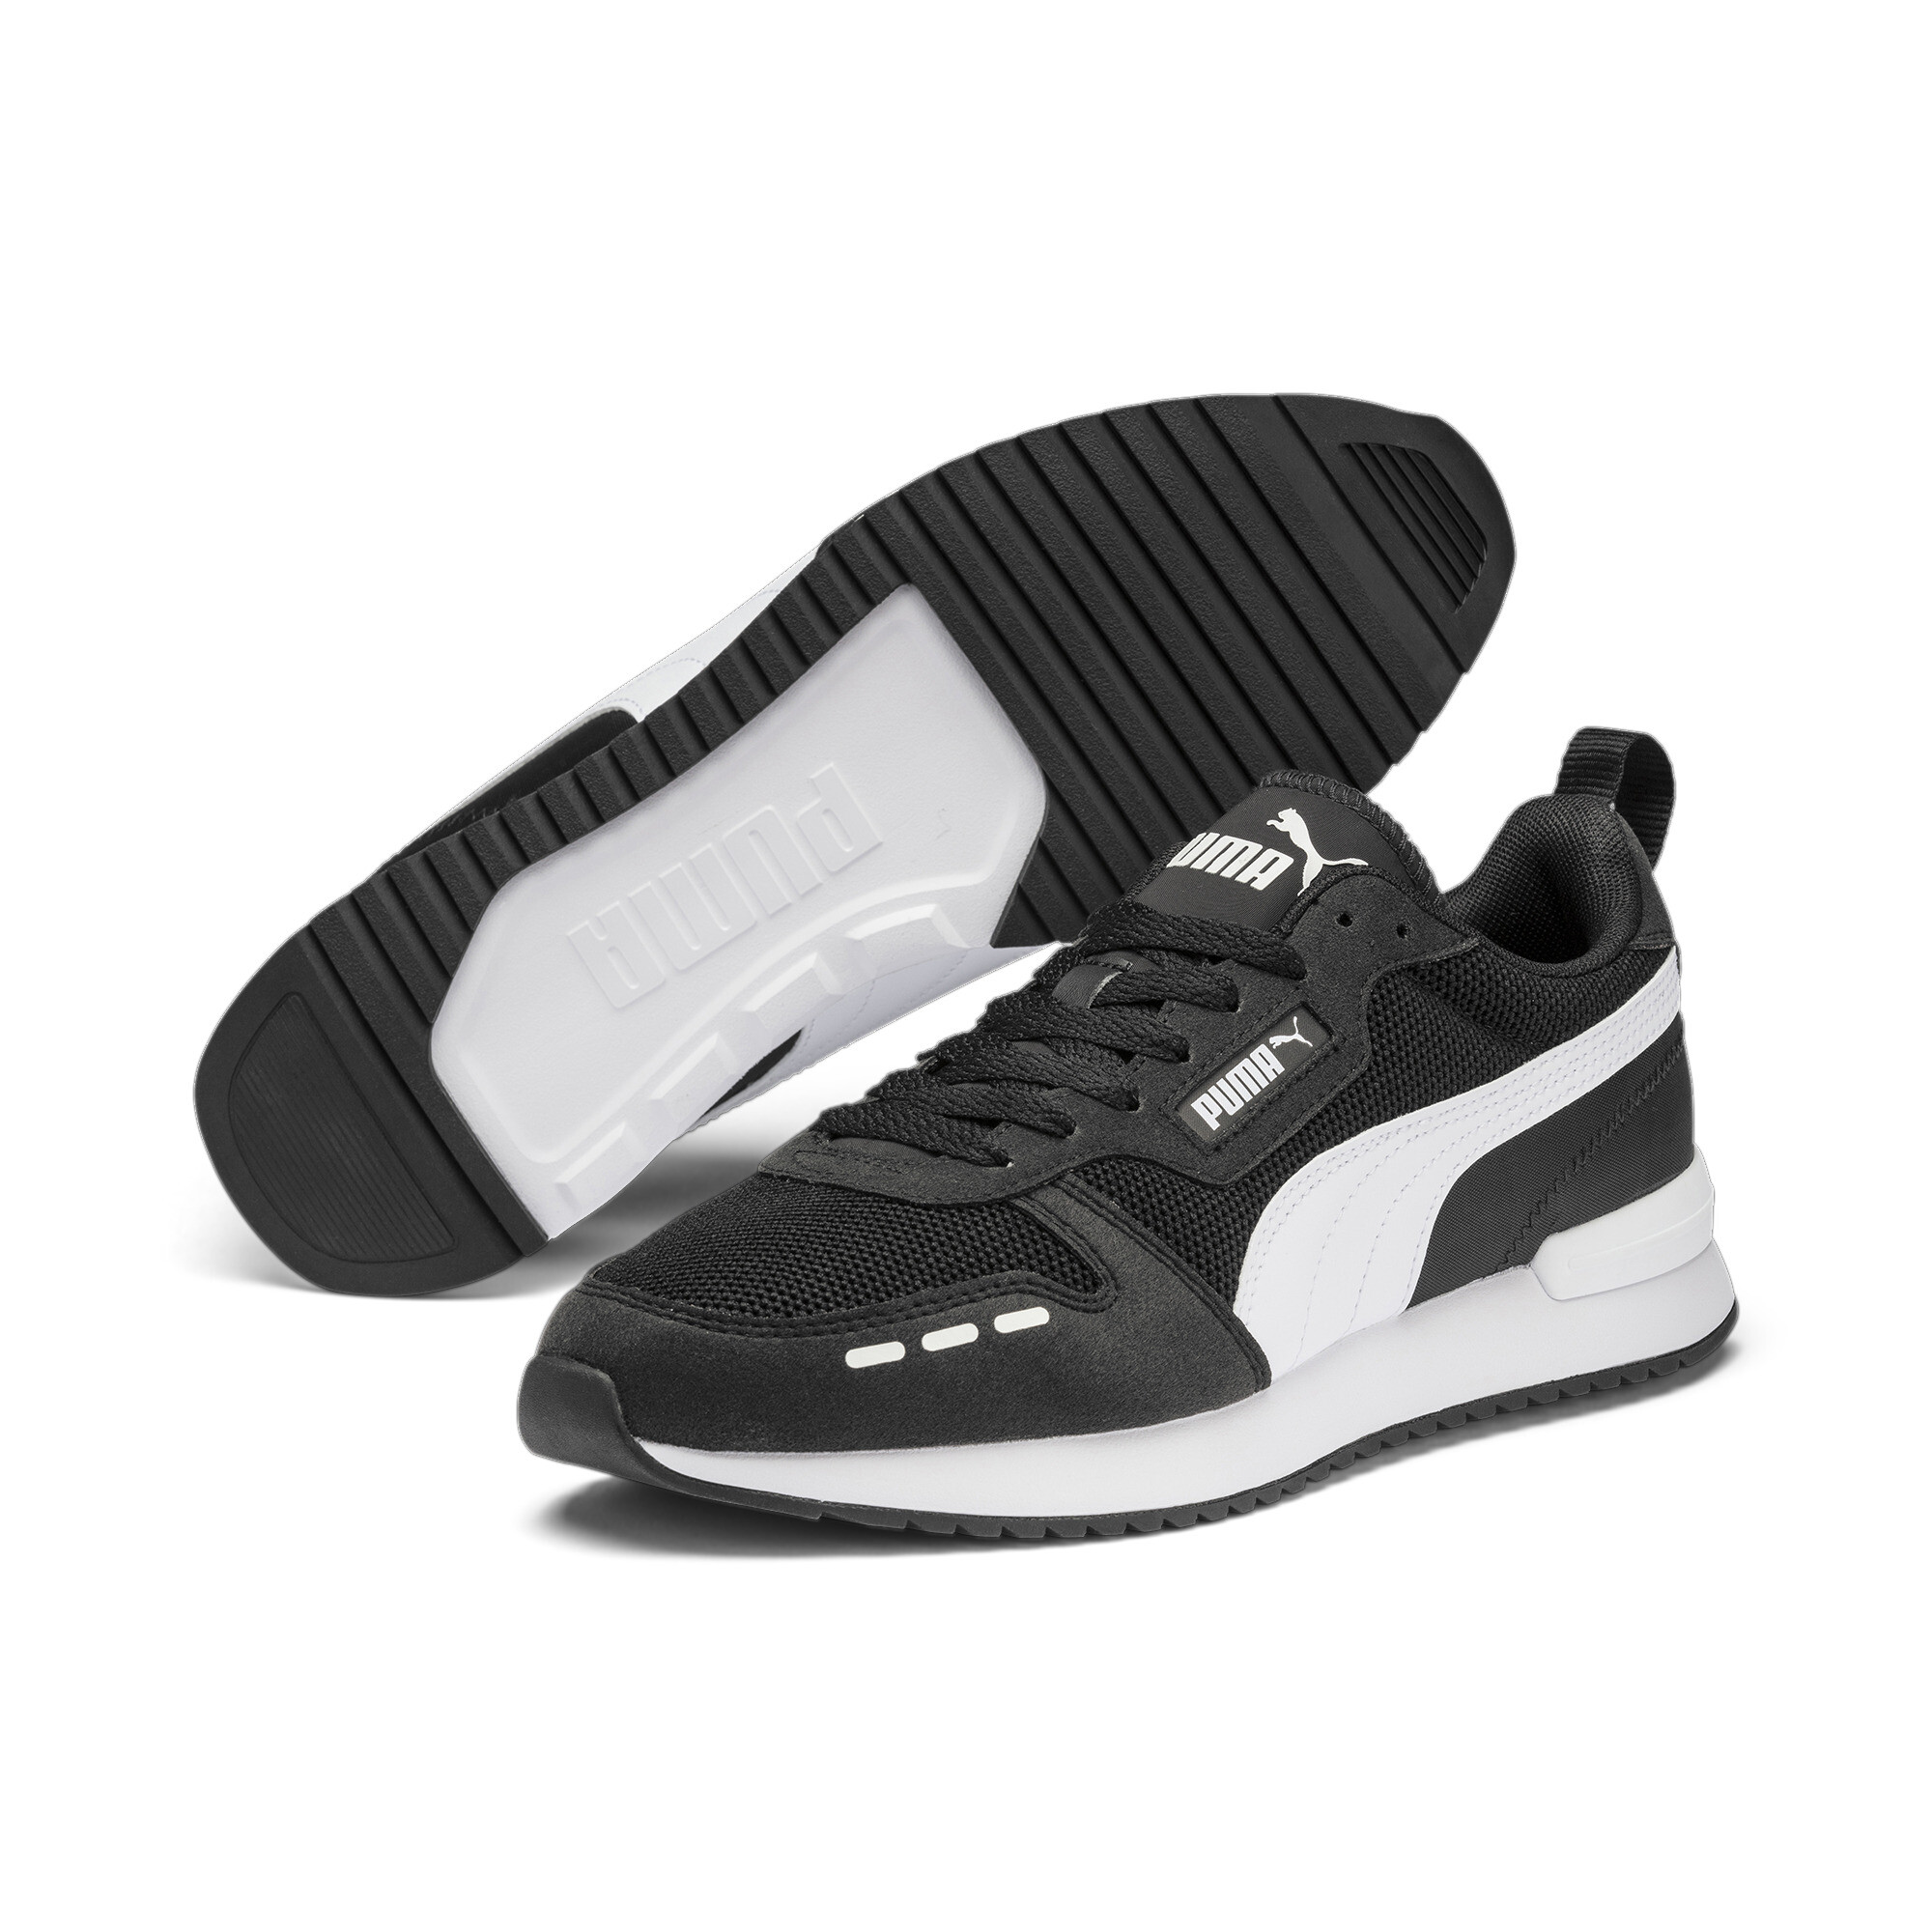 Puma R78 Runner Trainers, Black, Size 37.5, Shoes